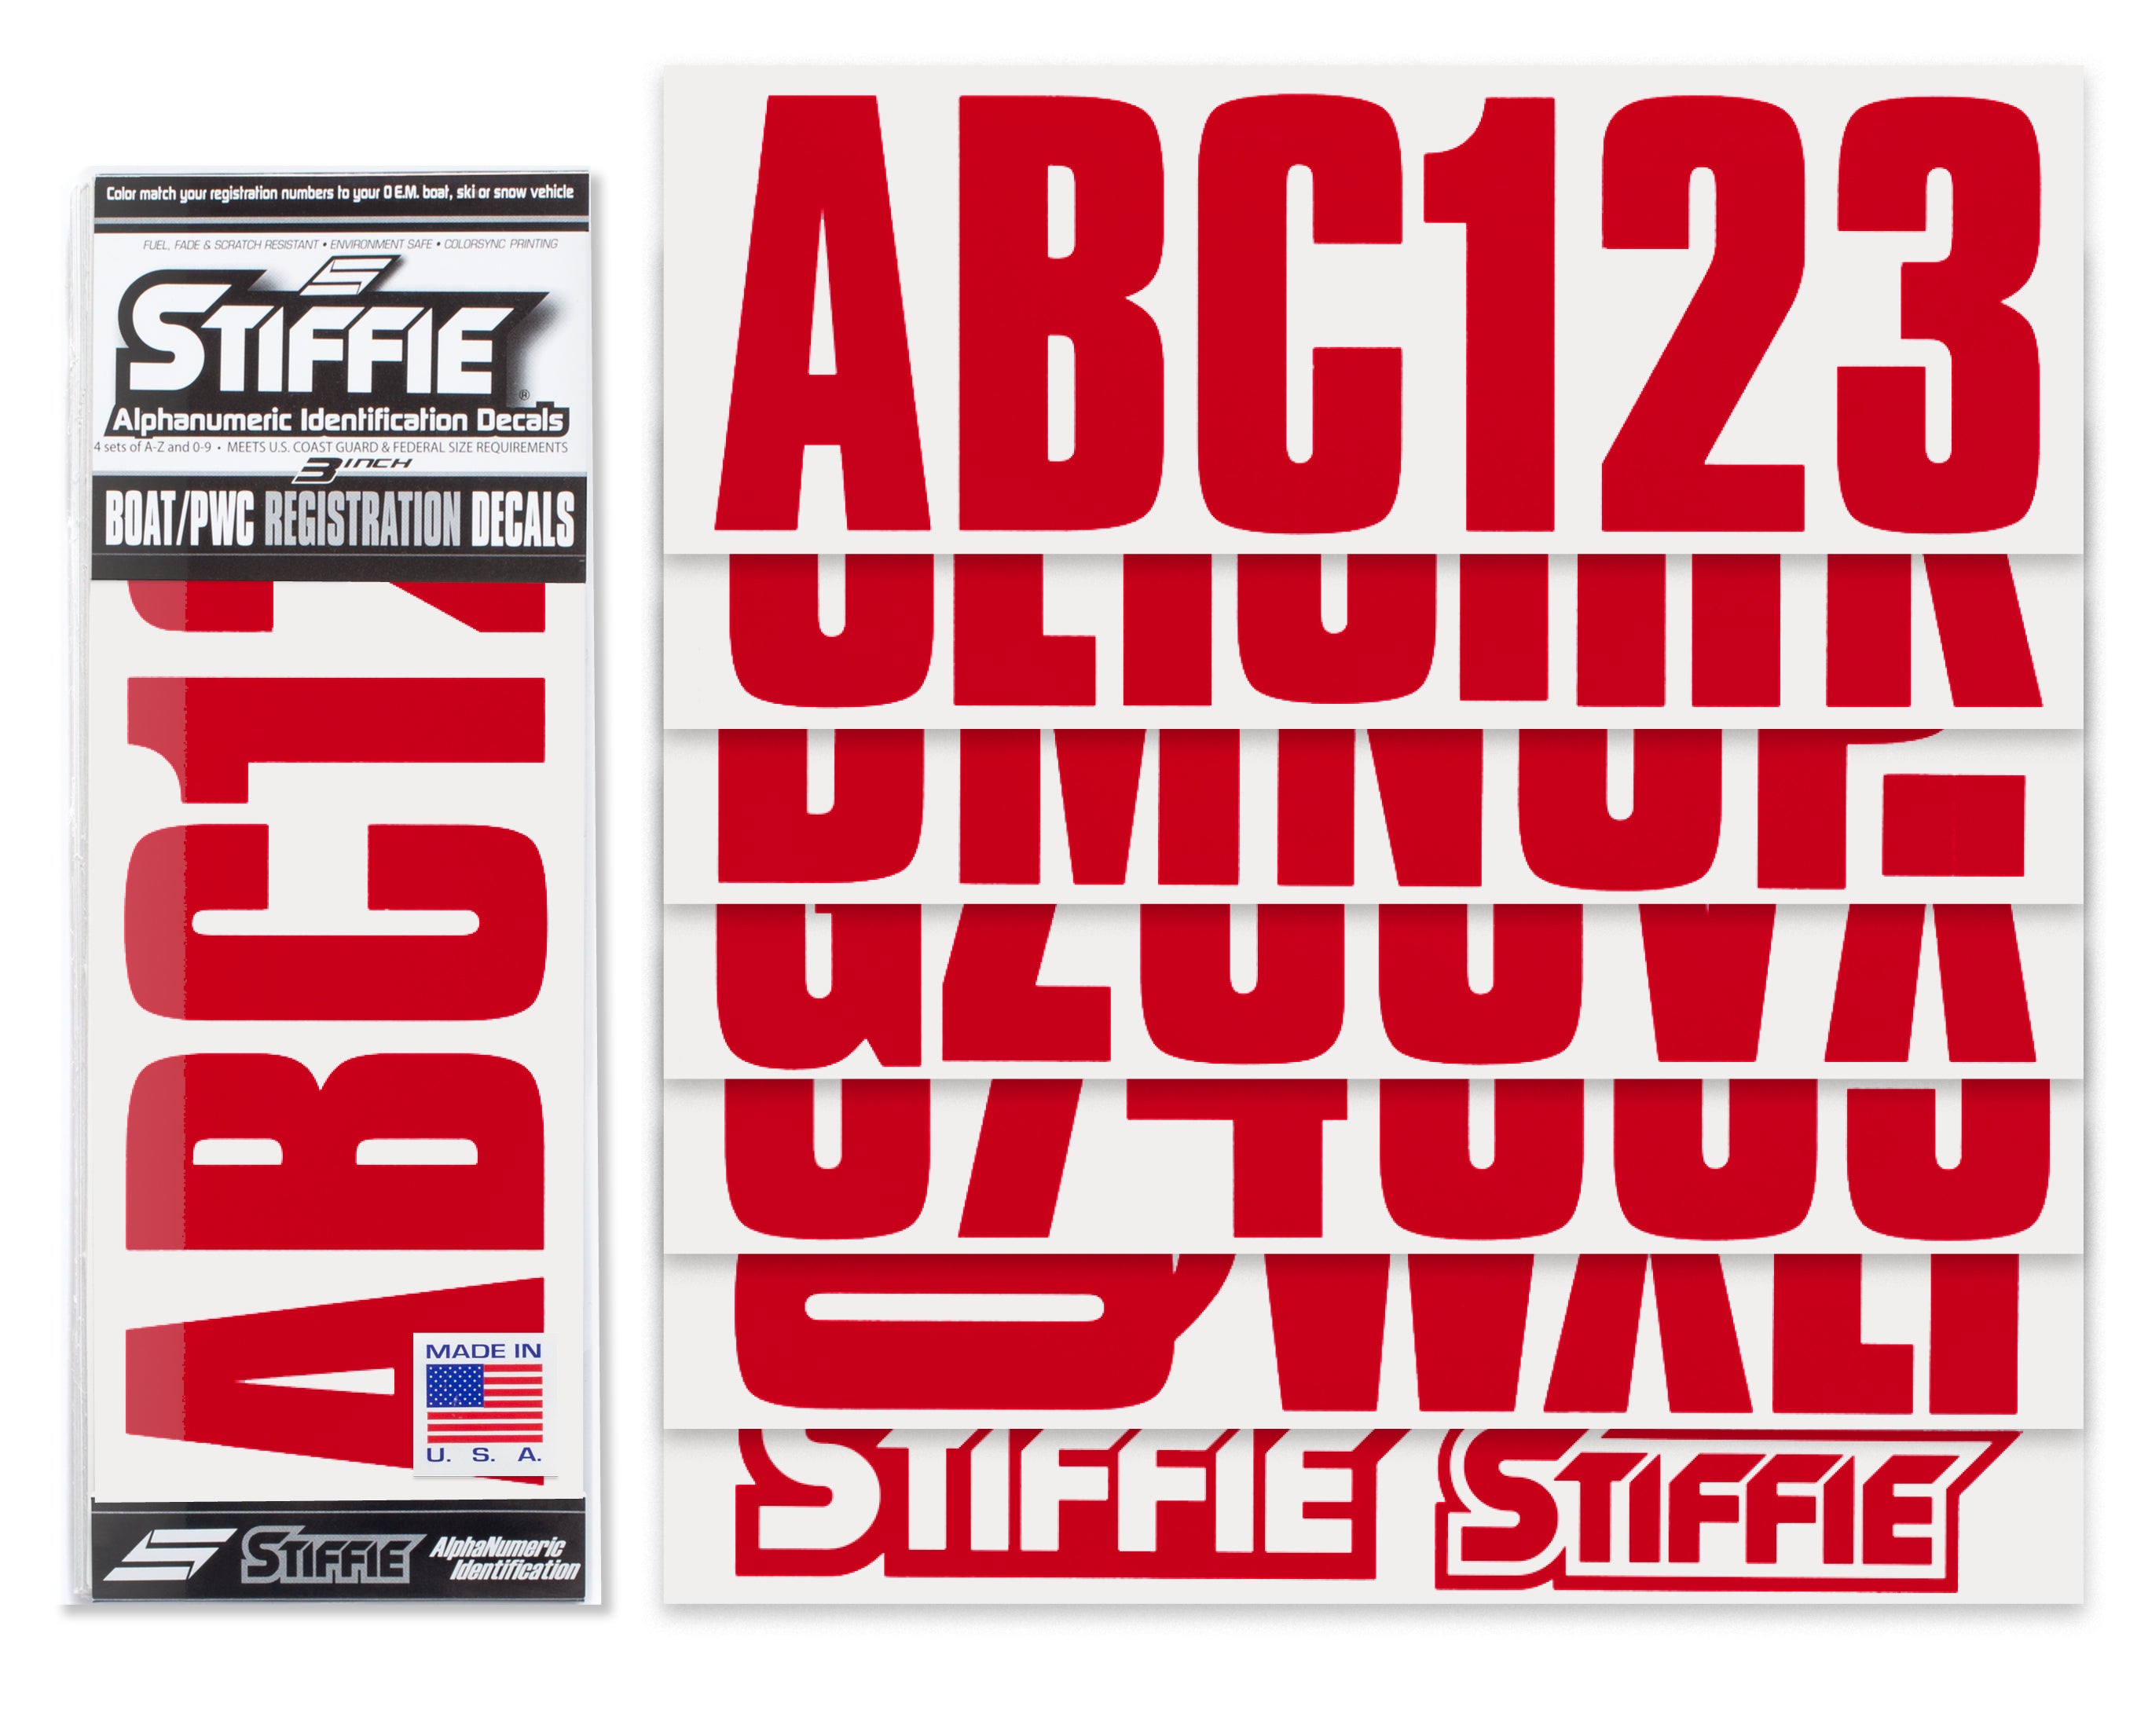 STIFFIE Uniline Red 3" ID Kit Alpha-Numeric Registration Identification Numbers Stickers Decals for Boats & Personal Watercraft